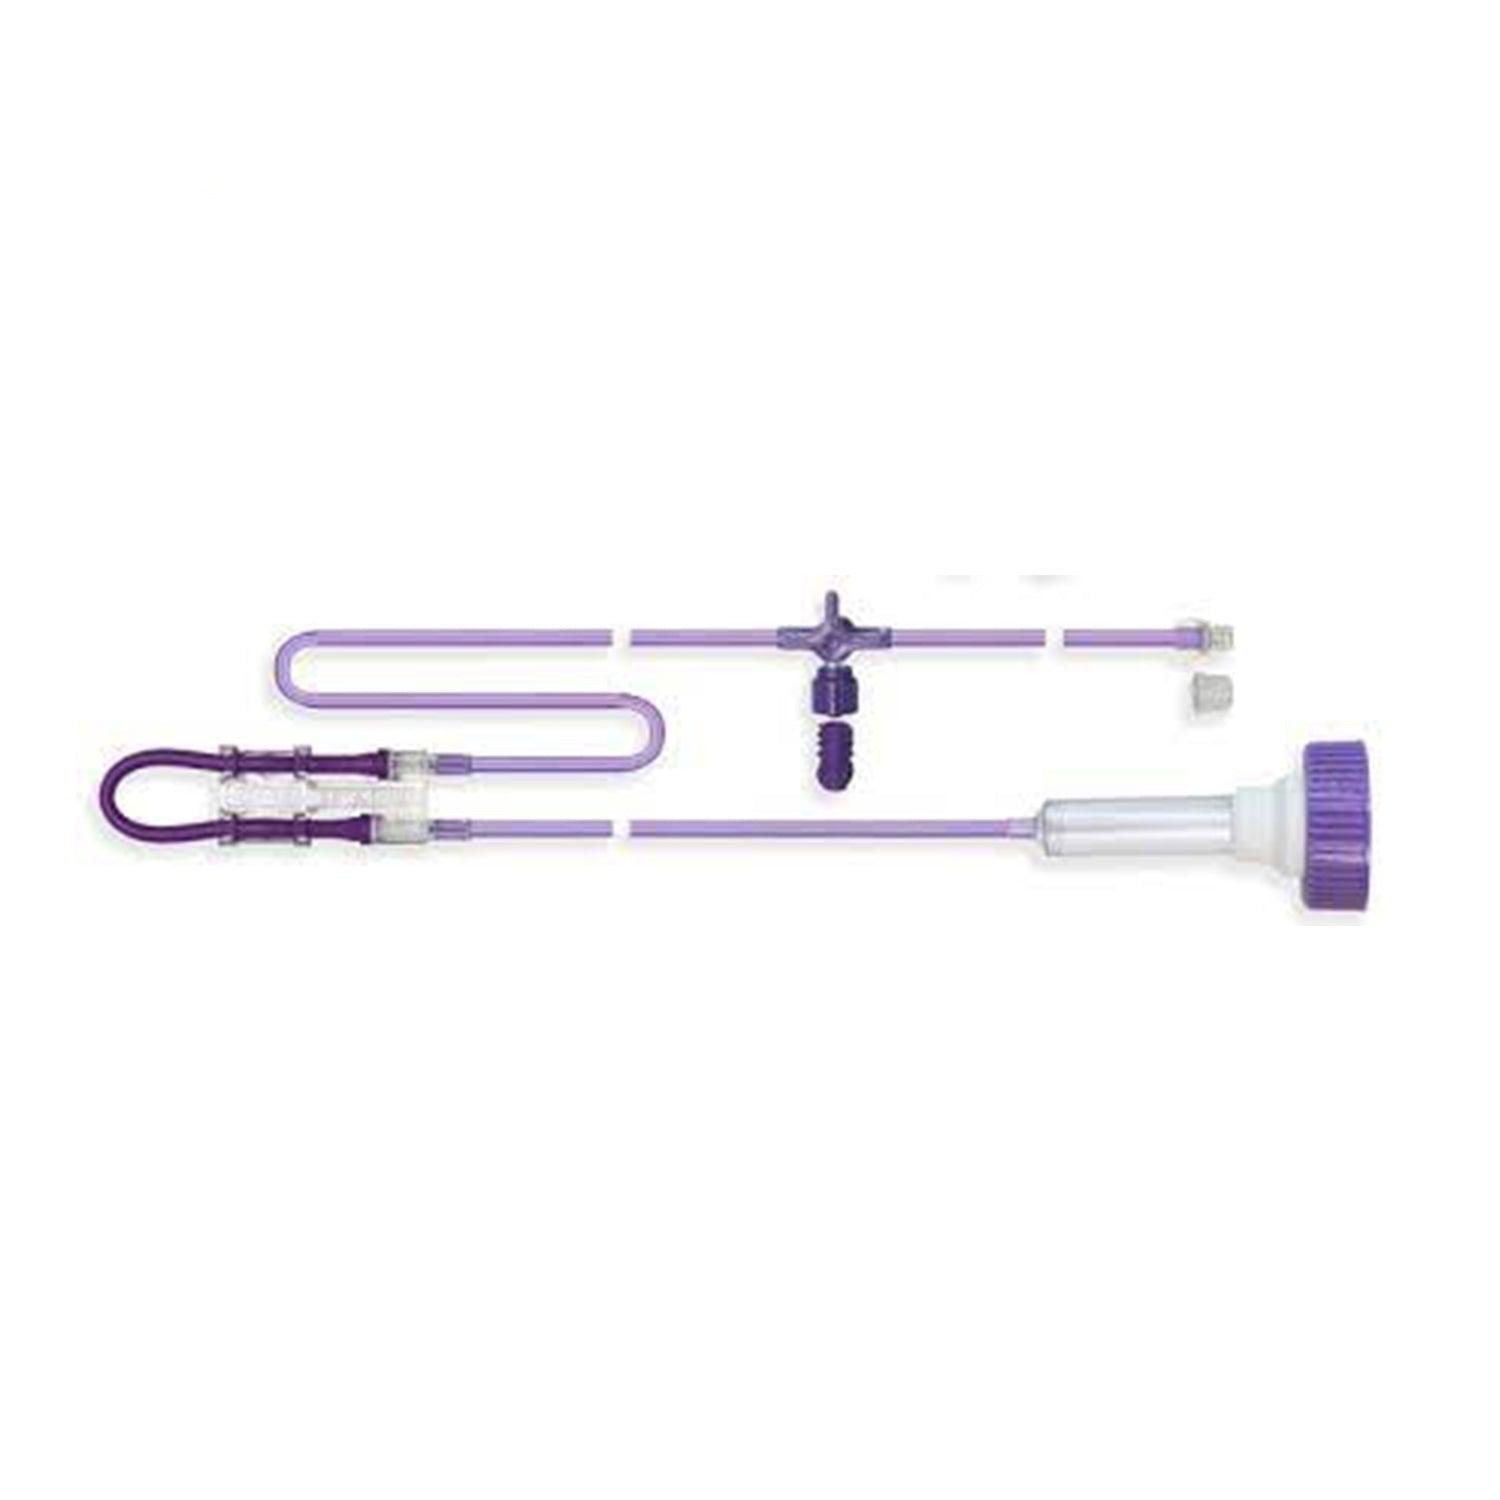 Flocare® Infinity Bottle and Spike Sets. - Anjelstore 